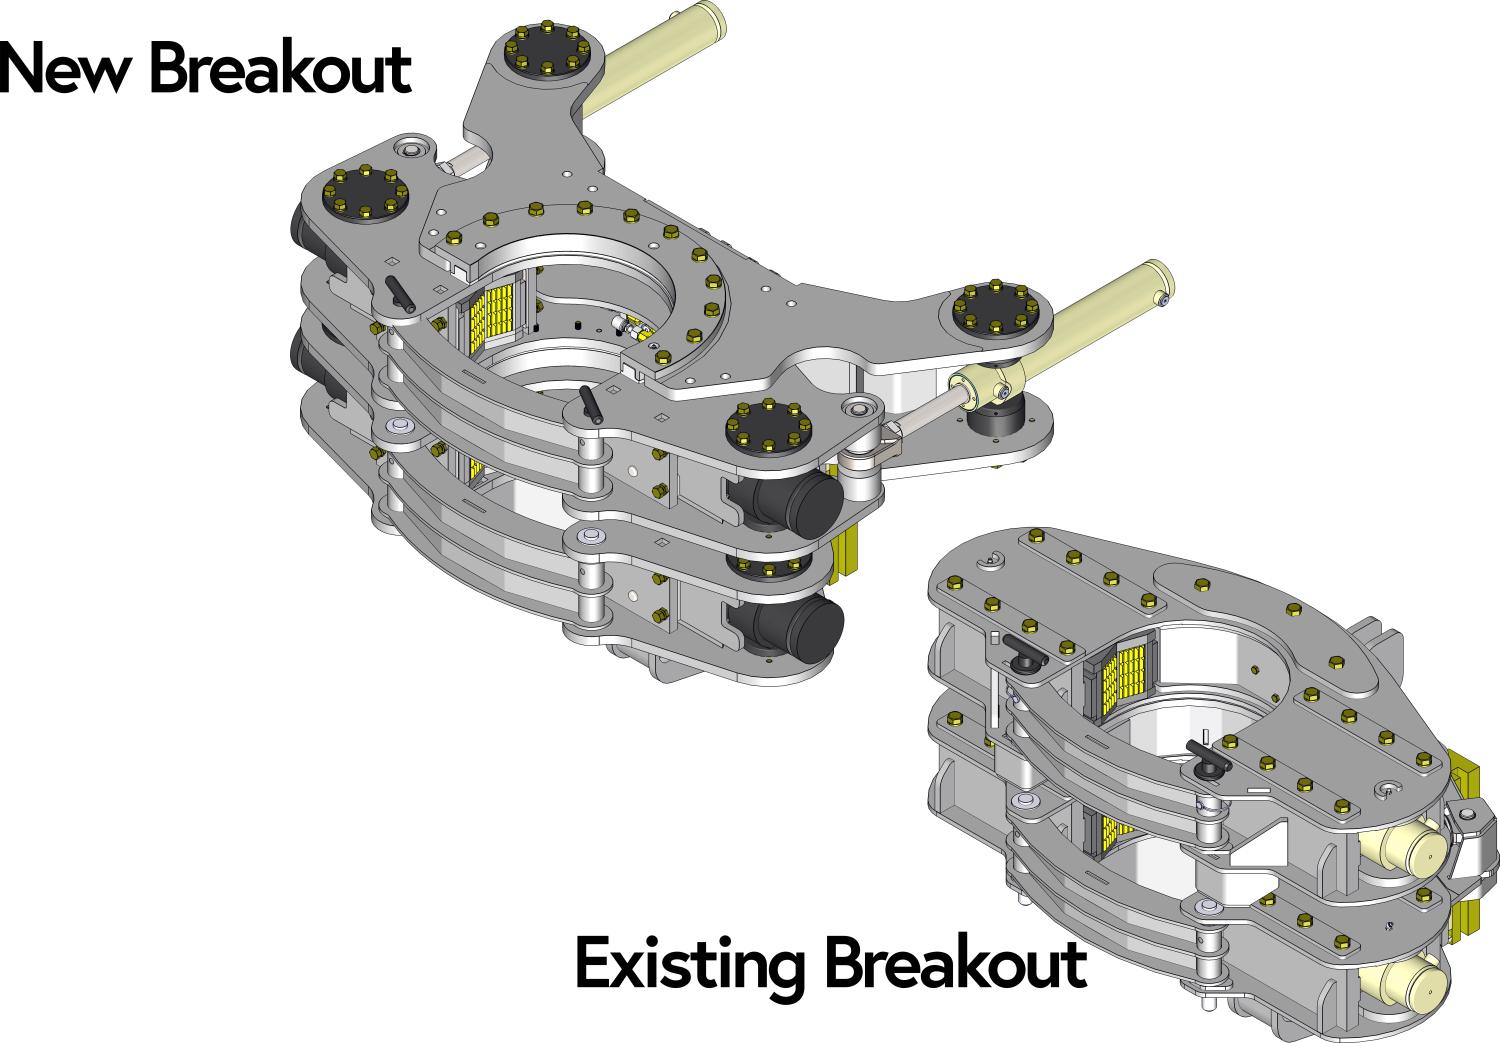 New Breakout compared to Existing Breakout on Sonic Drills